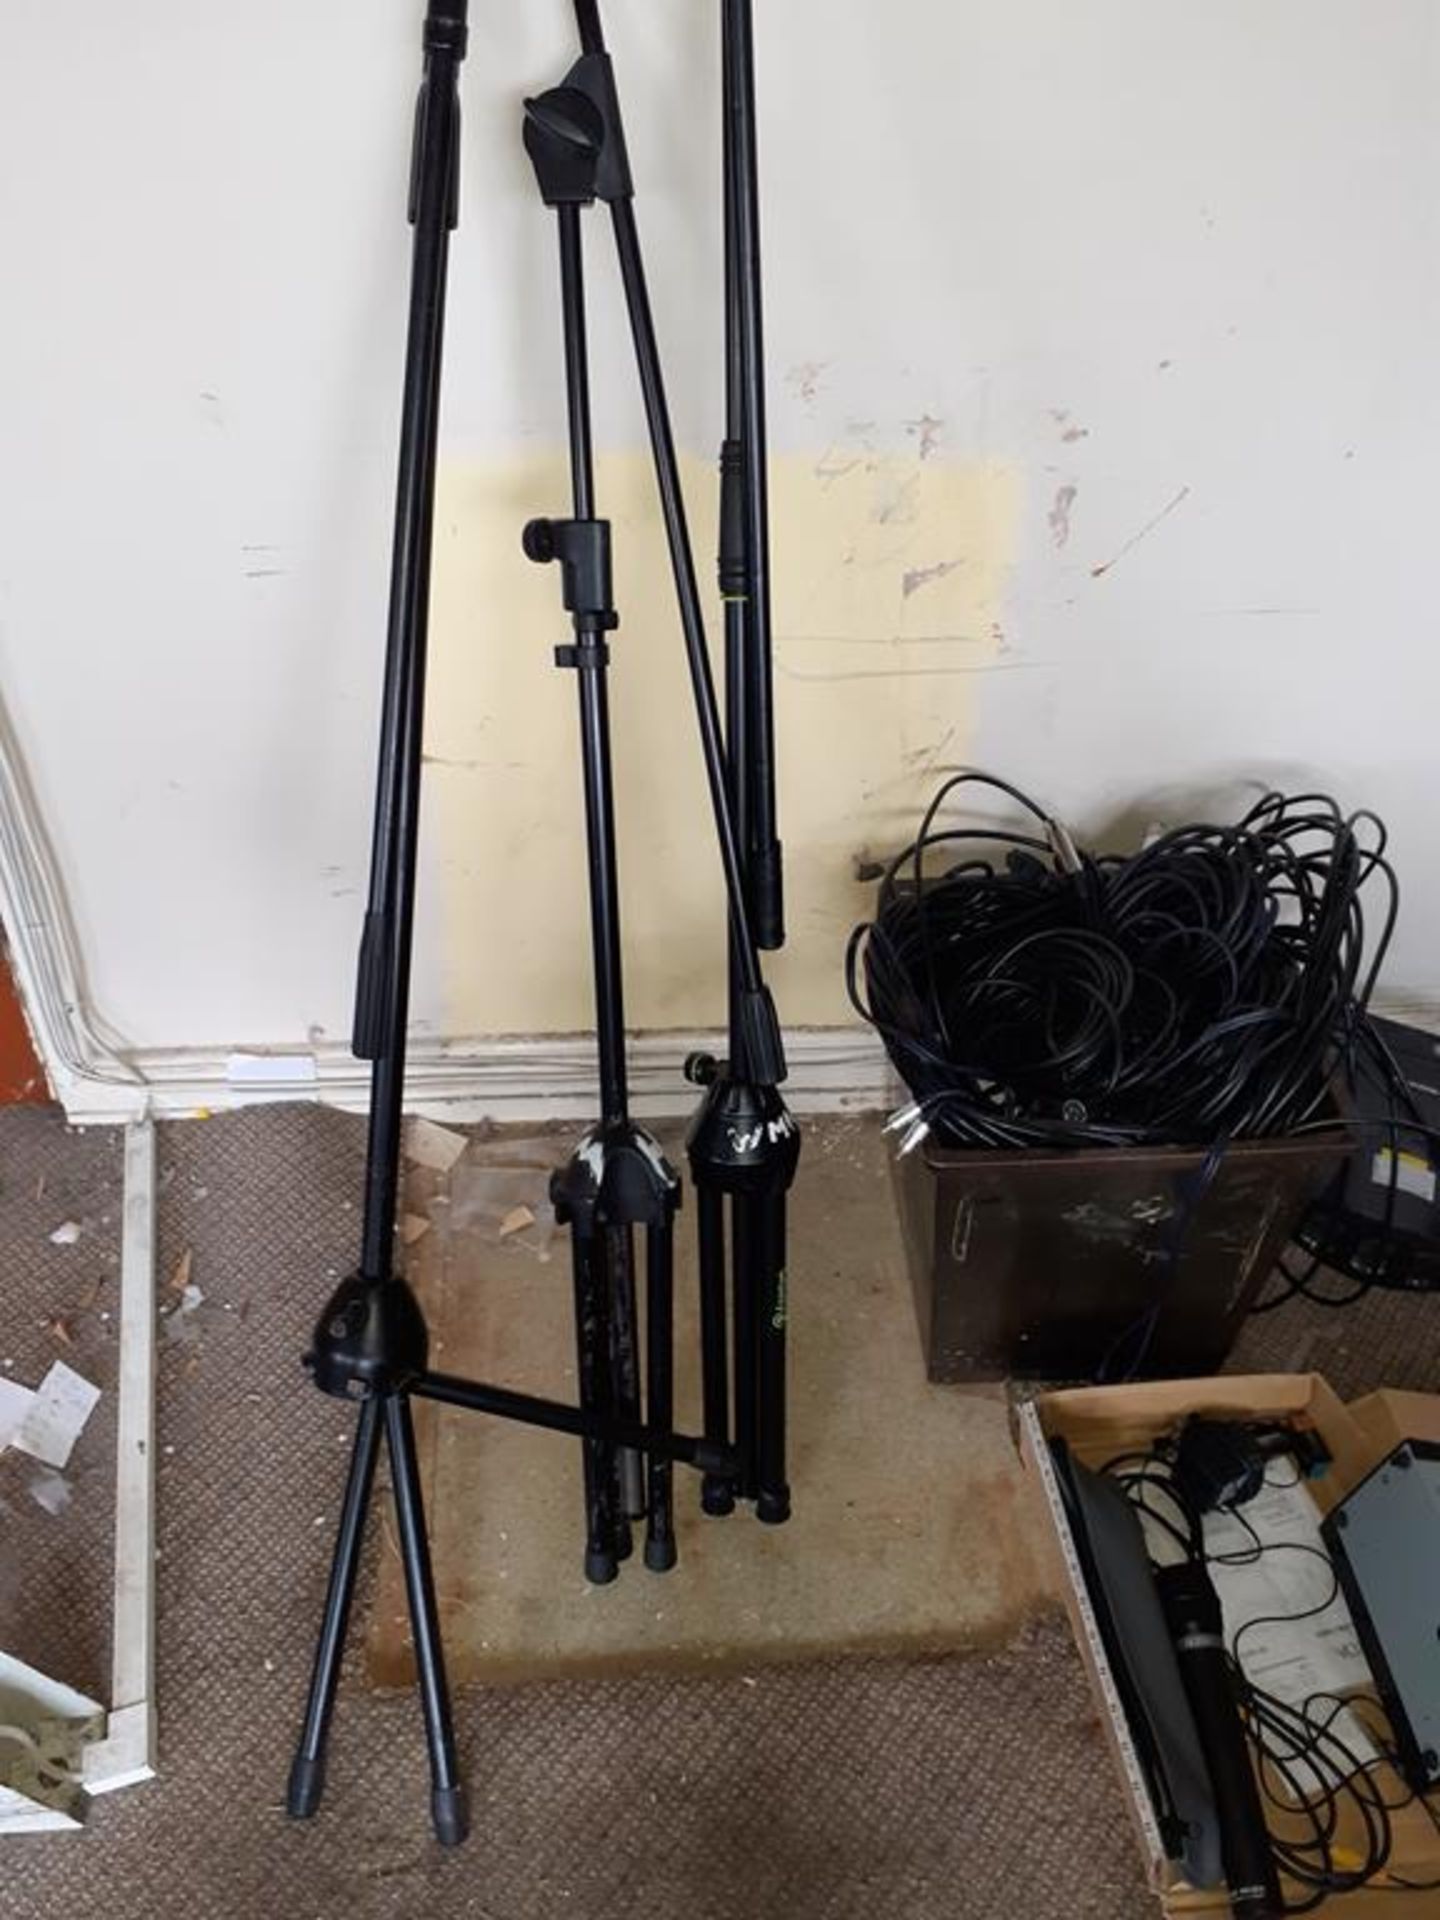 2 x Mic Systems with Mic Stands, Rewo Sweep Disco Light and Qty of Audio Cables - Image 5 of 5